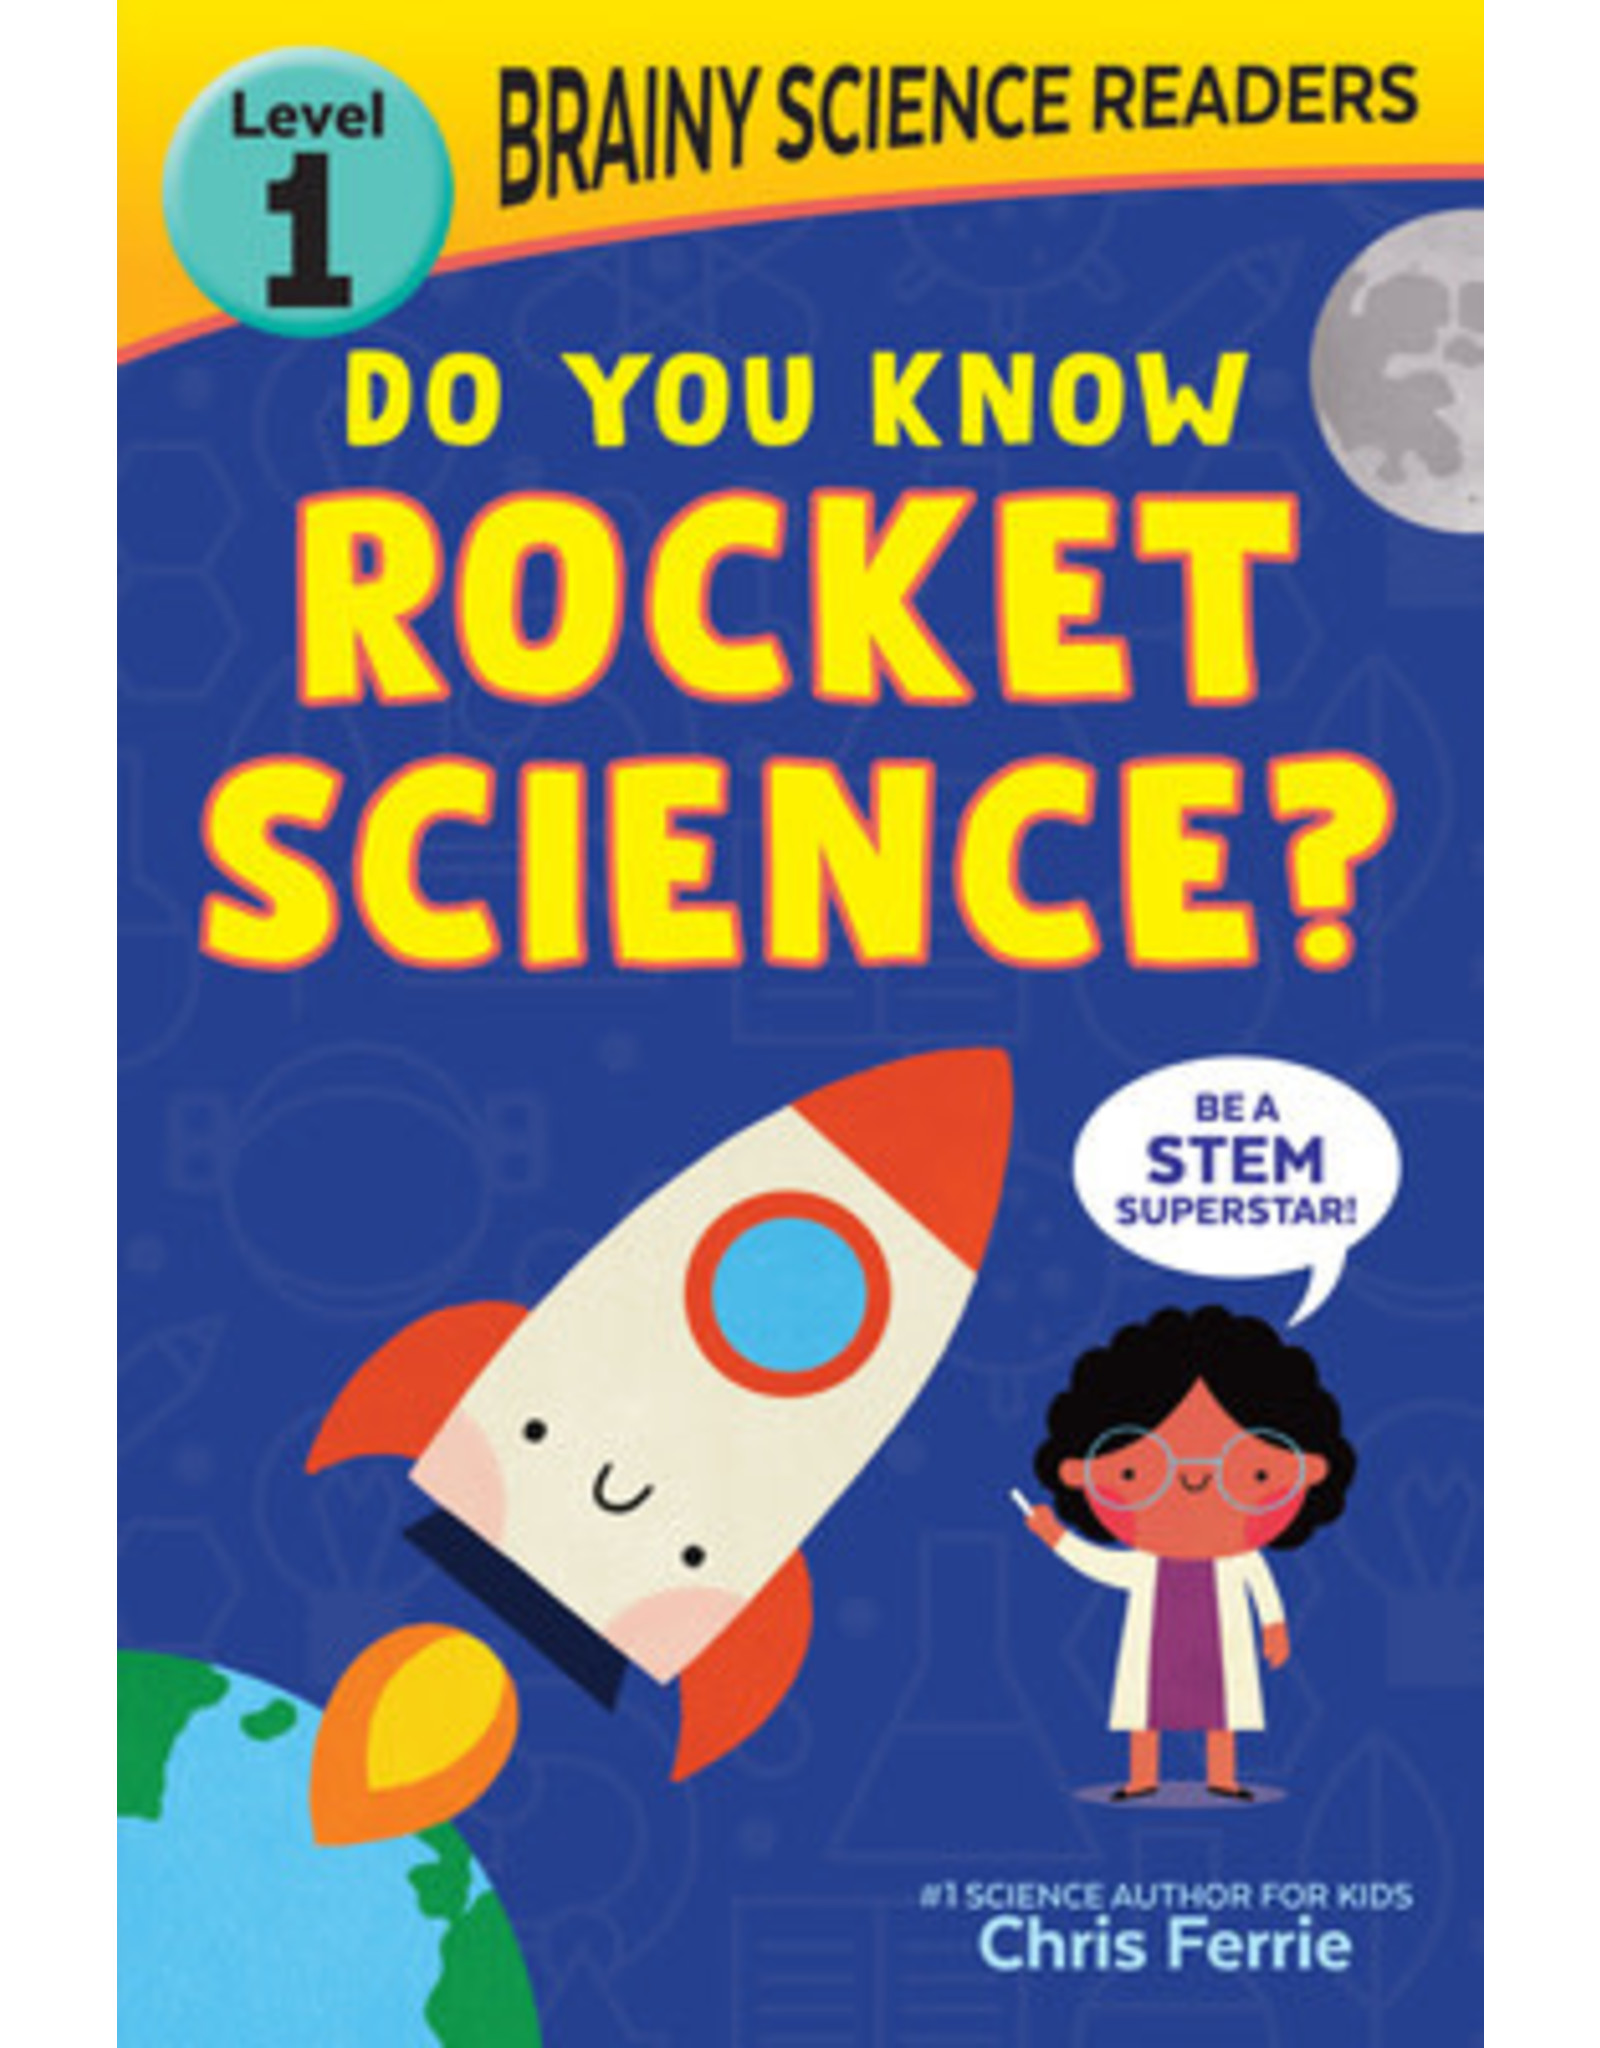 Do you know Rocket Science?